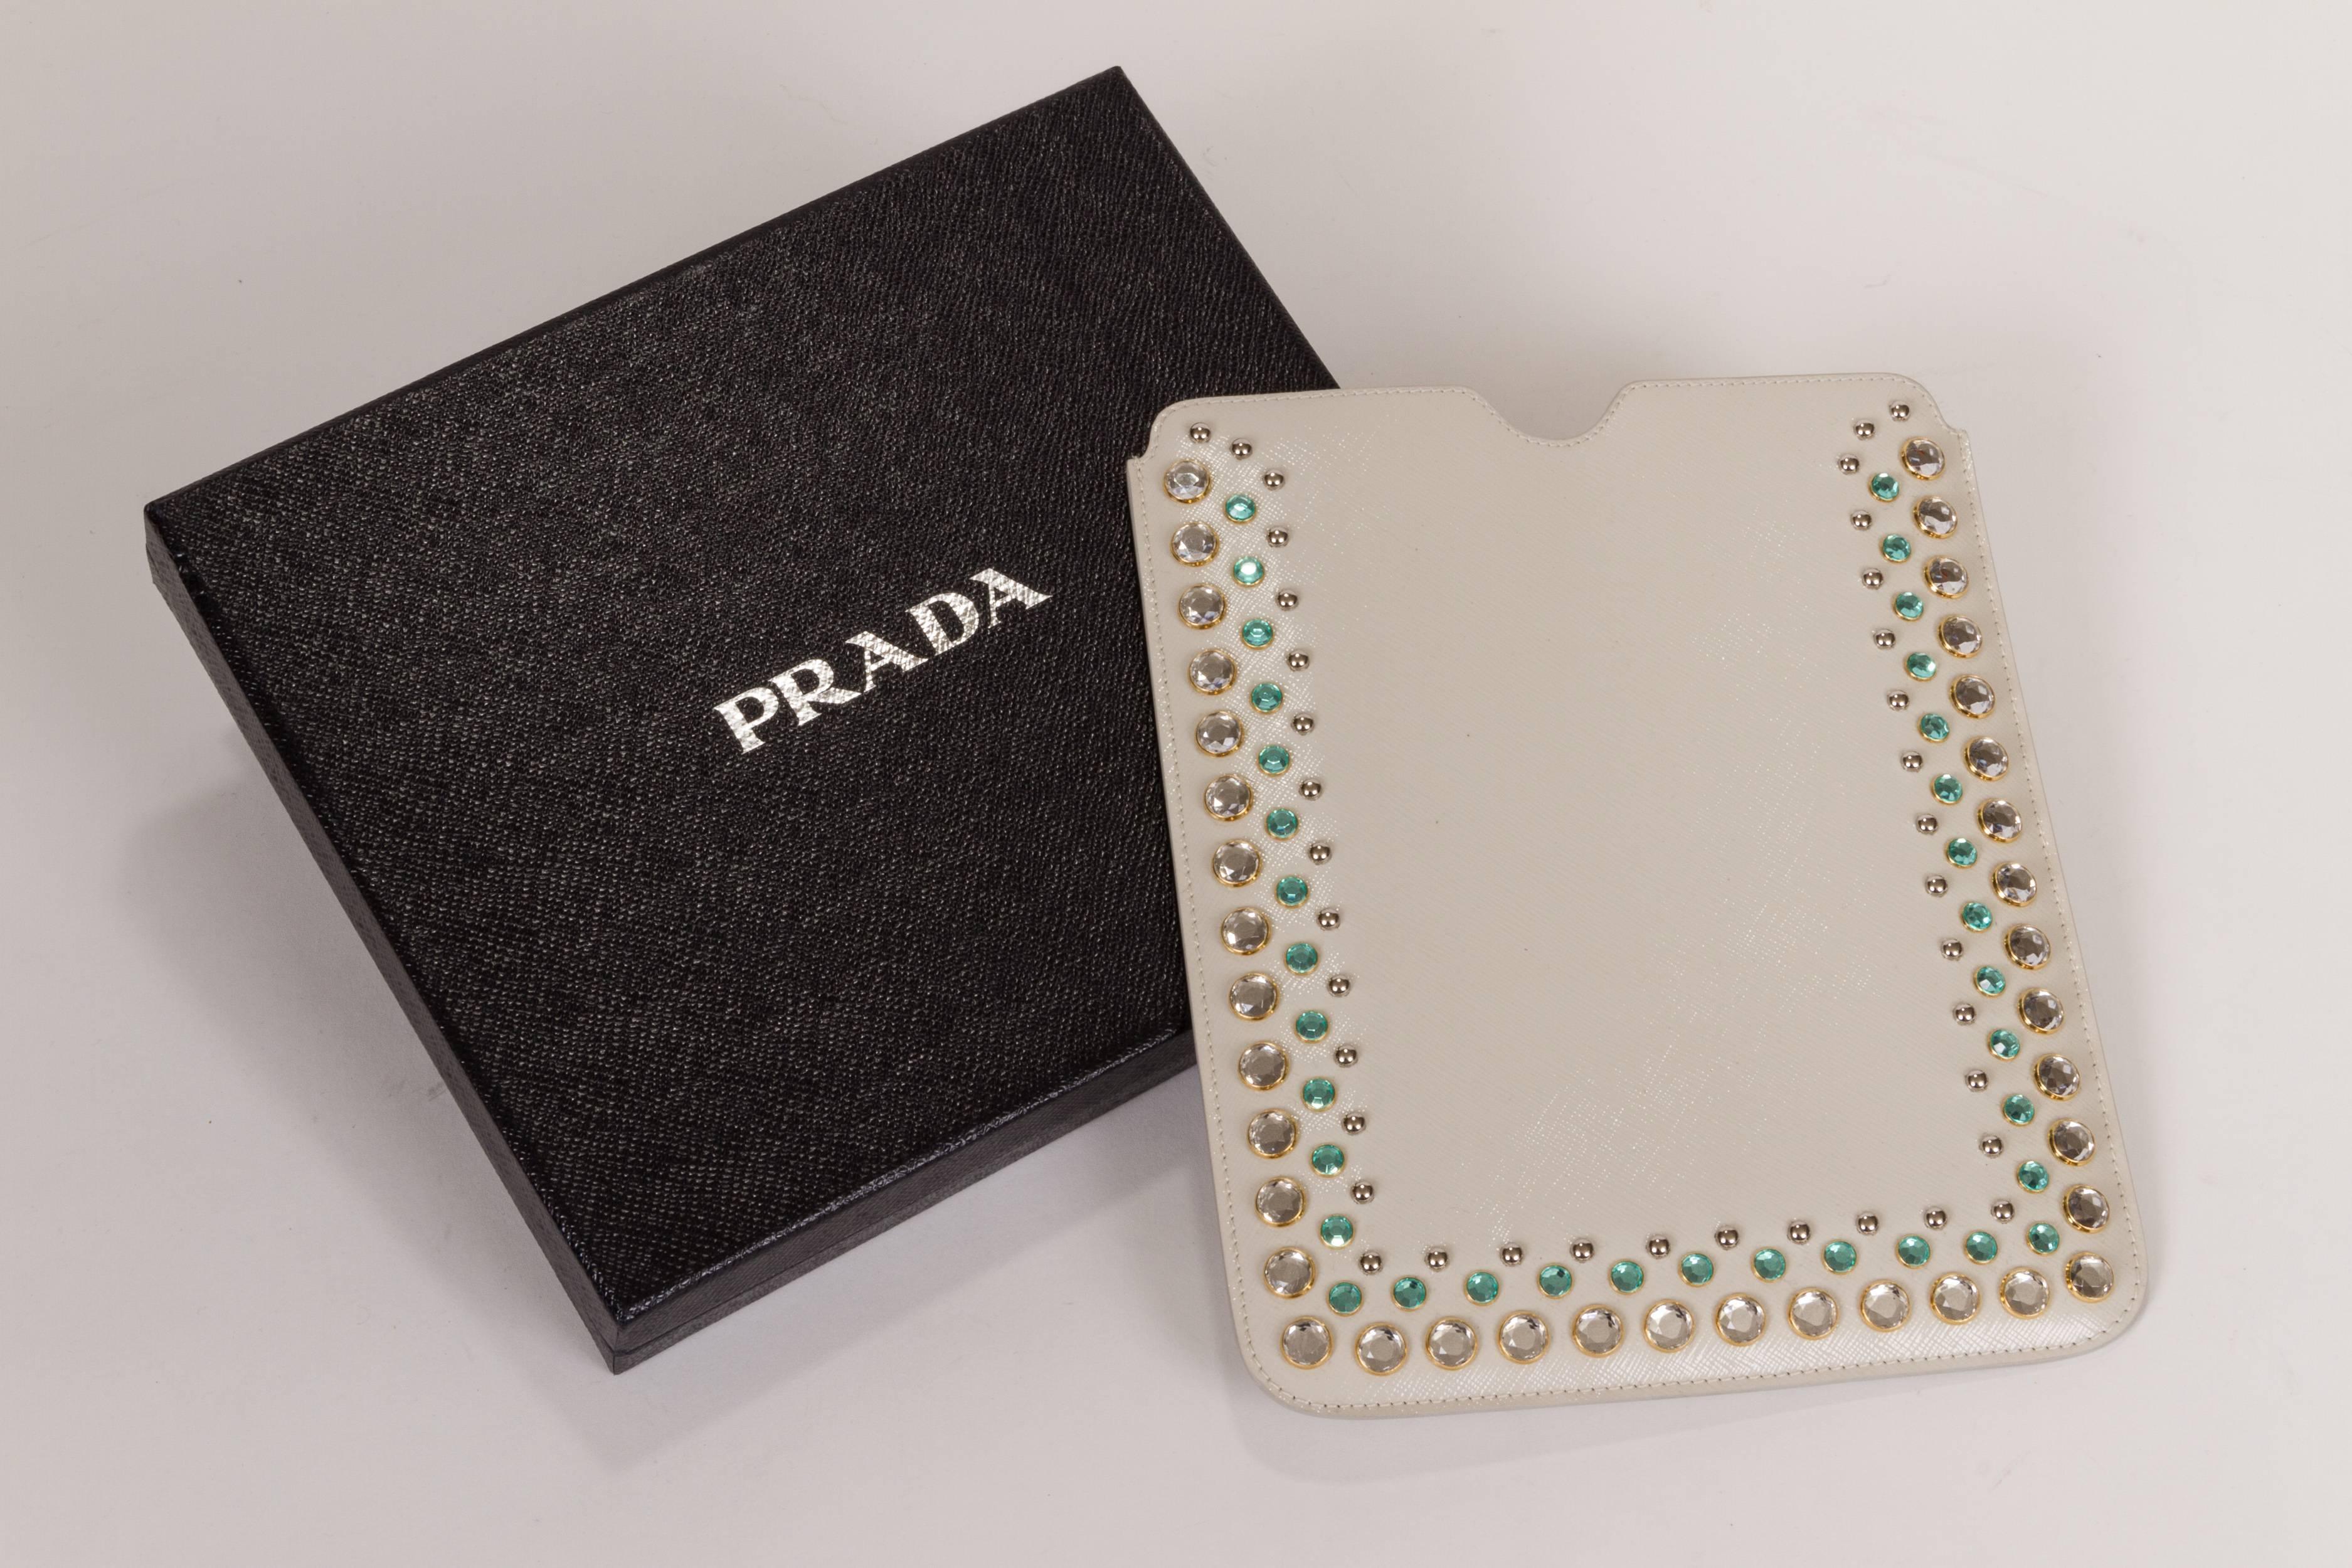 New with tags, bejeweled ipad cover case. Glossy saffiano leather in creamy white with green jewels.Butter lambskin leather interior. Gold tone Prada lettering. Comes with original box, warranty and tag.